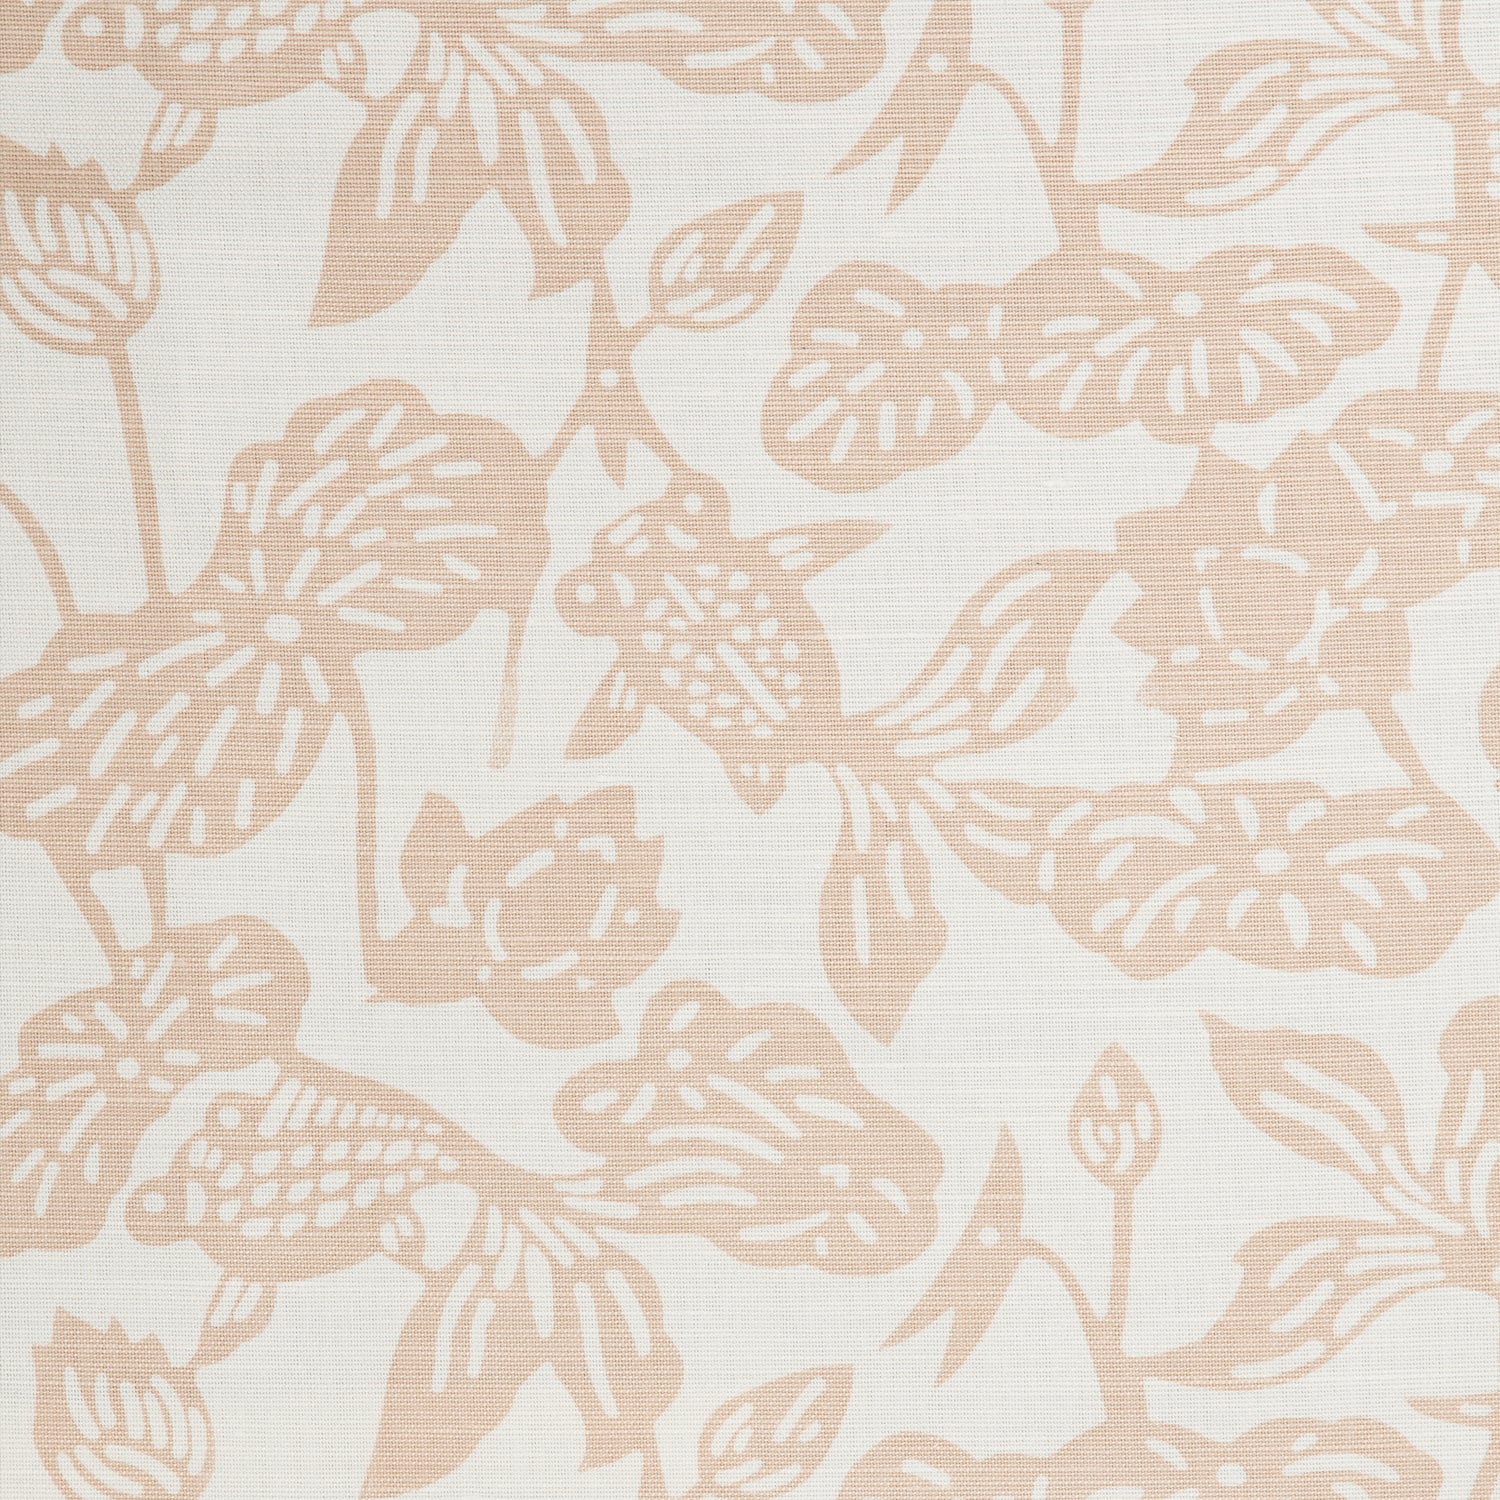 Detail of a cotton fabric in a repeating fish and leaf pattern in peach on a cream field.